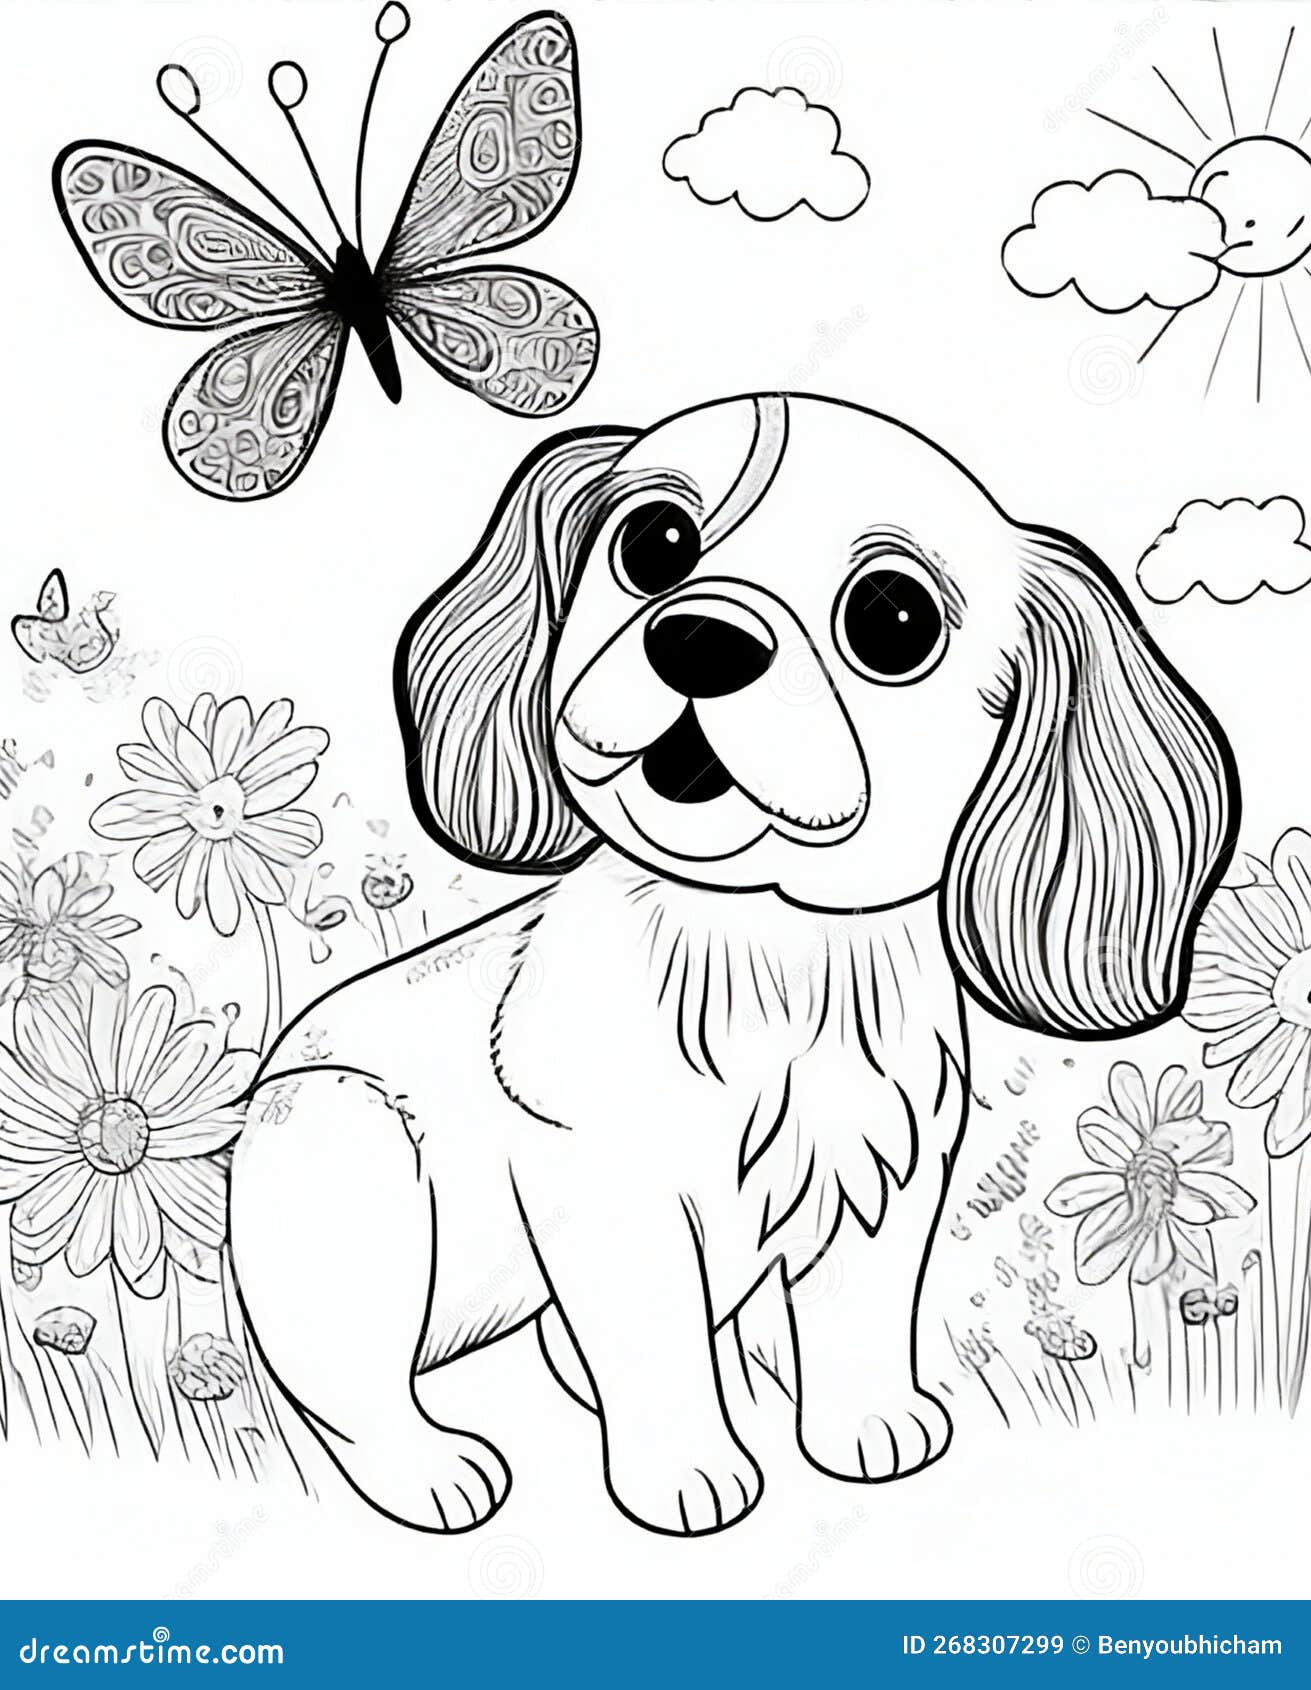 Dog coloring page stock photos